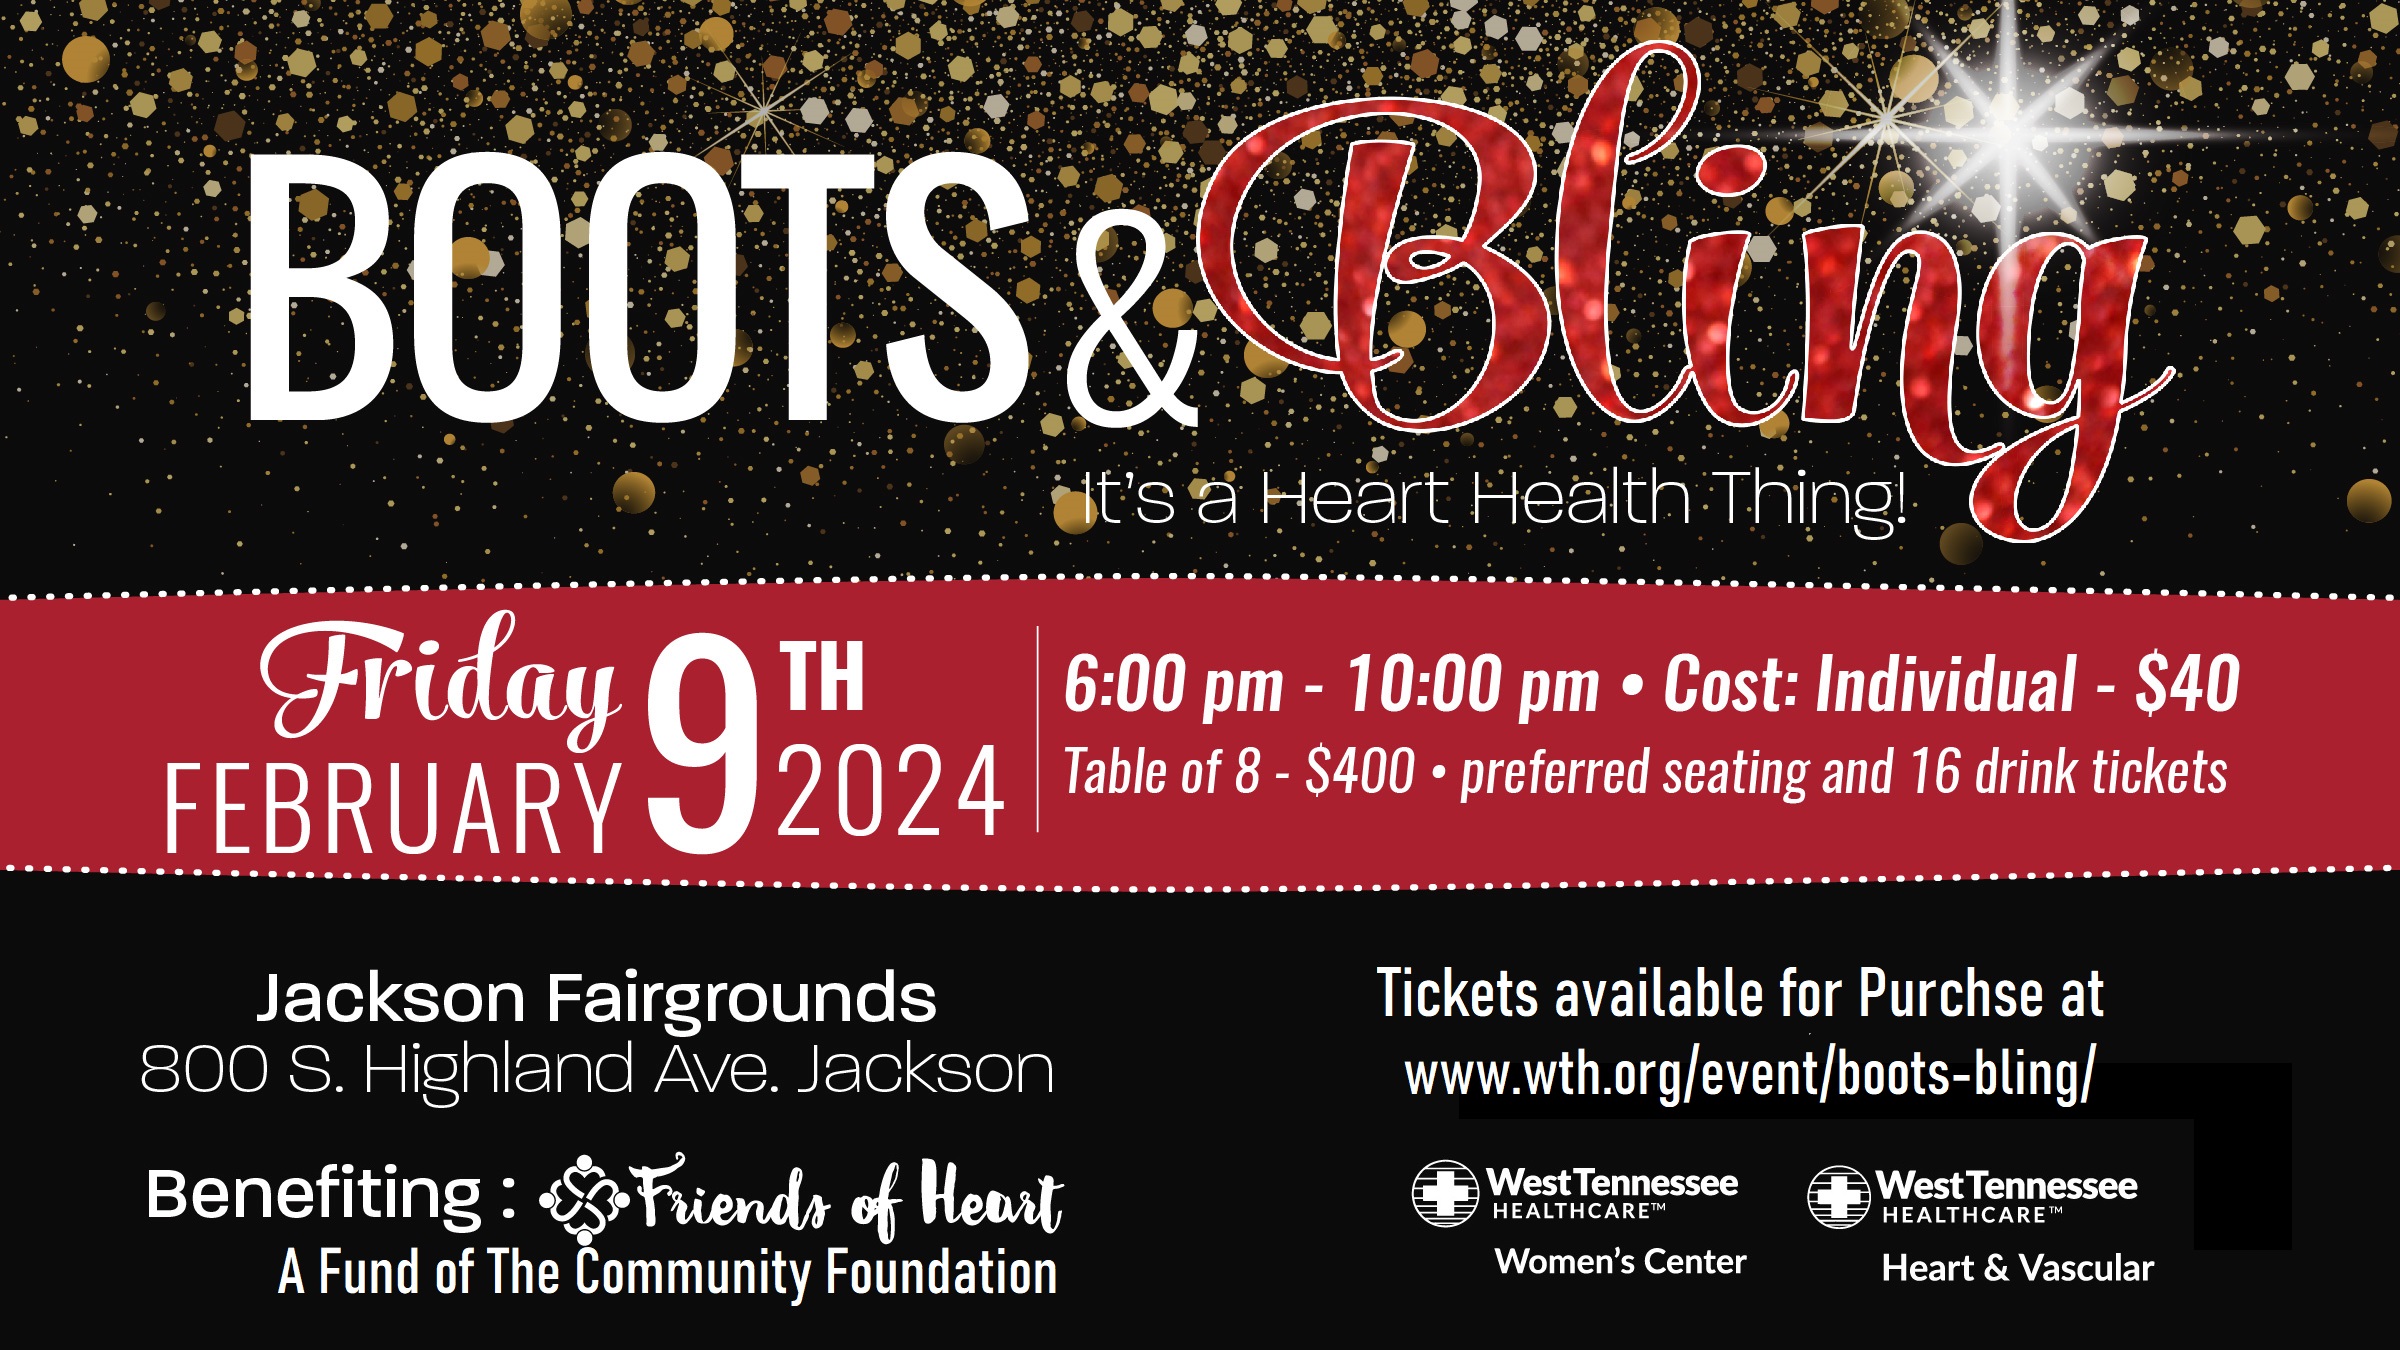 https://www.friendsofheart.org/images/uploads/content_images/Boots_and_Bling_PSA_Poster.jpgBoots & Bling{/three_phots:file}